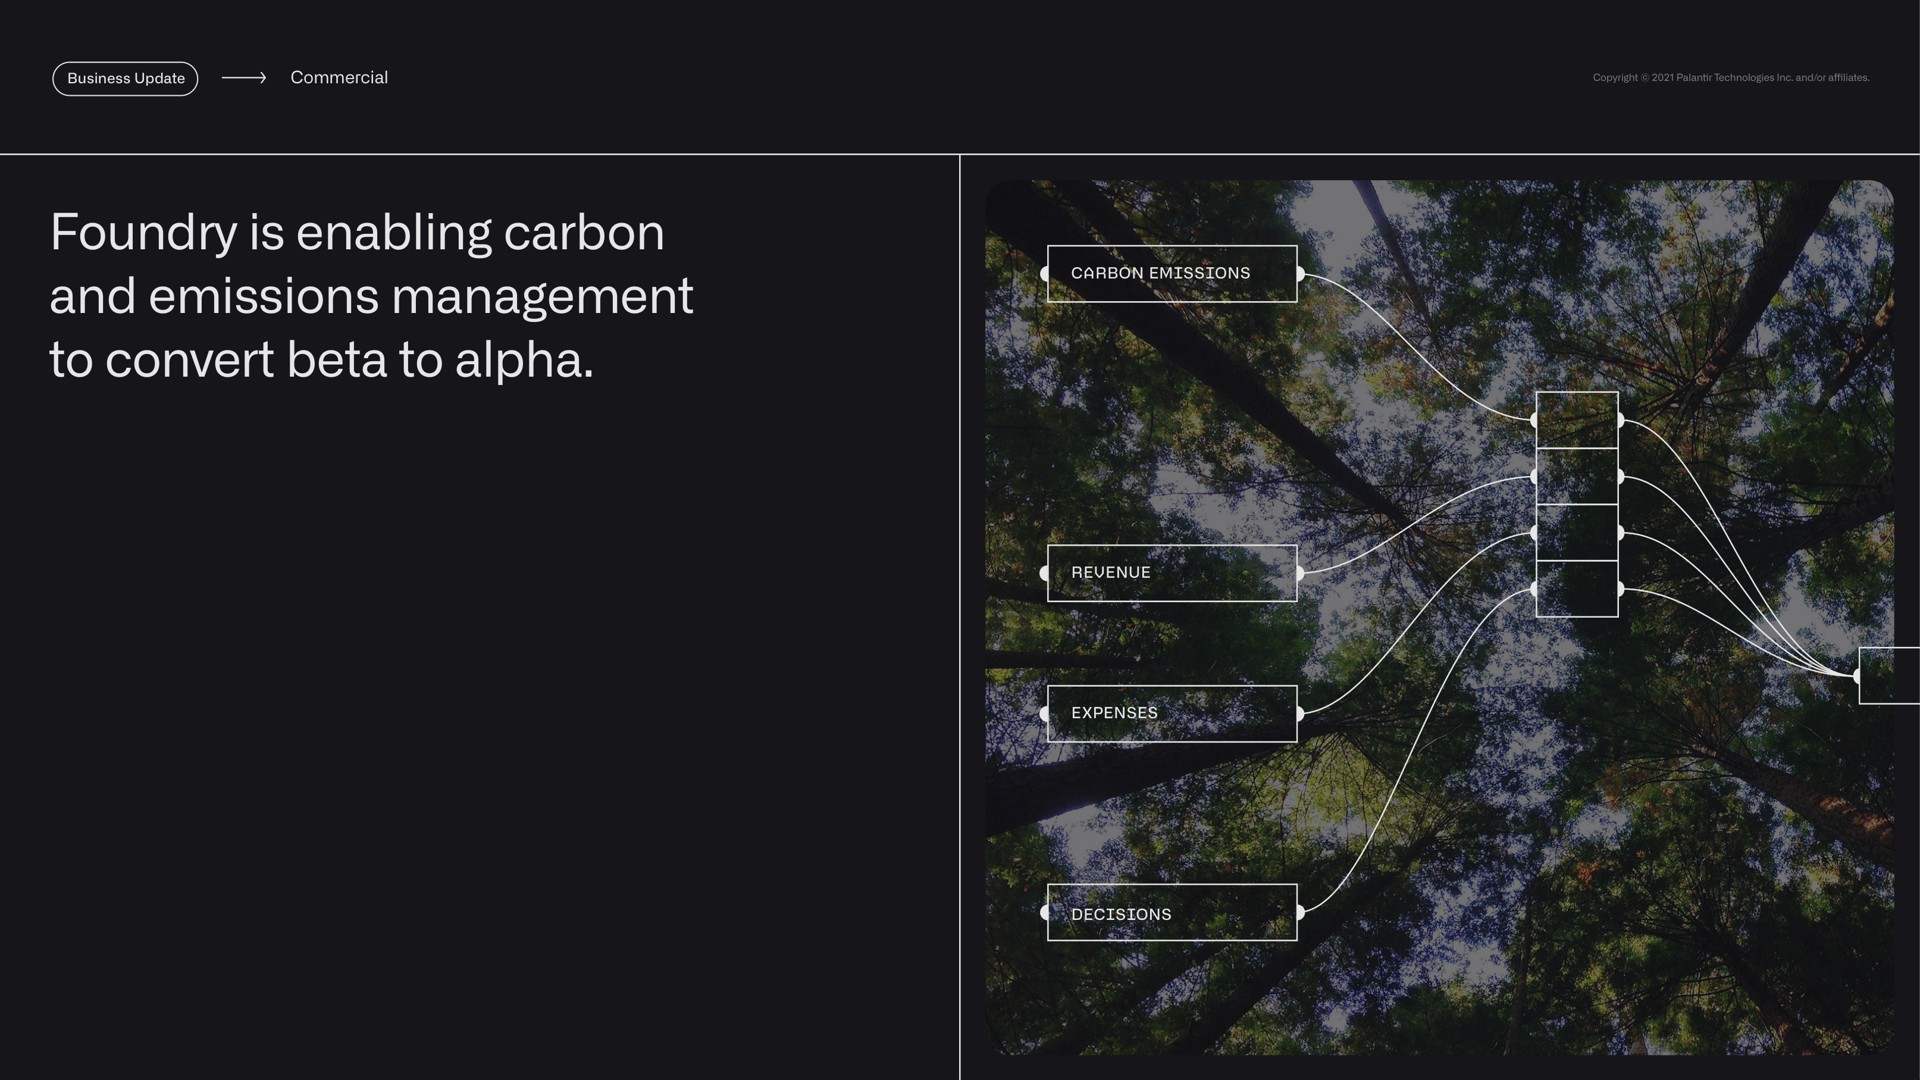 commercial foundry is enabling carbon and emissions management to convert beta to alpha carbon emissions revenue expenses decisions missions | Palantir